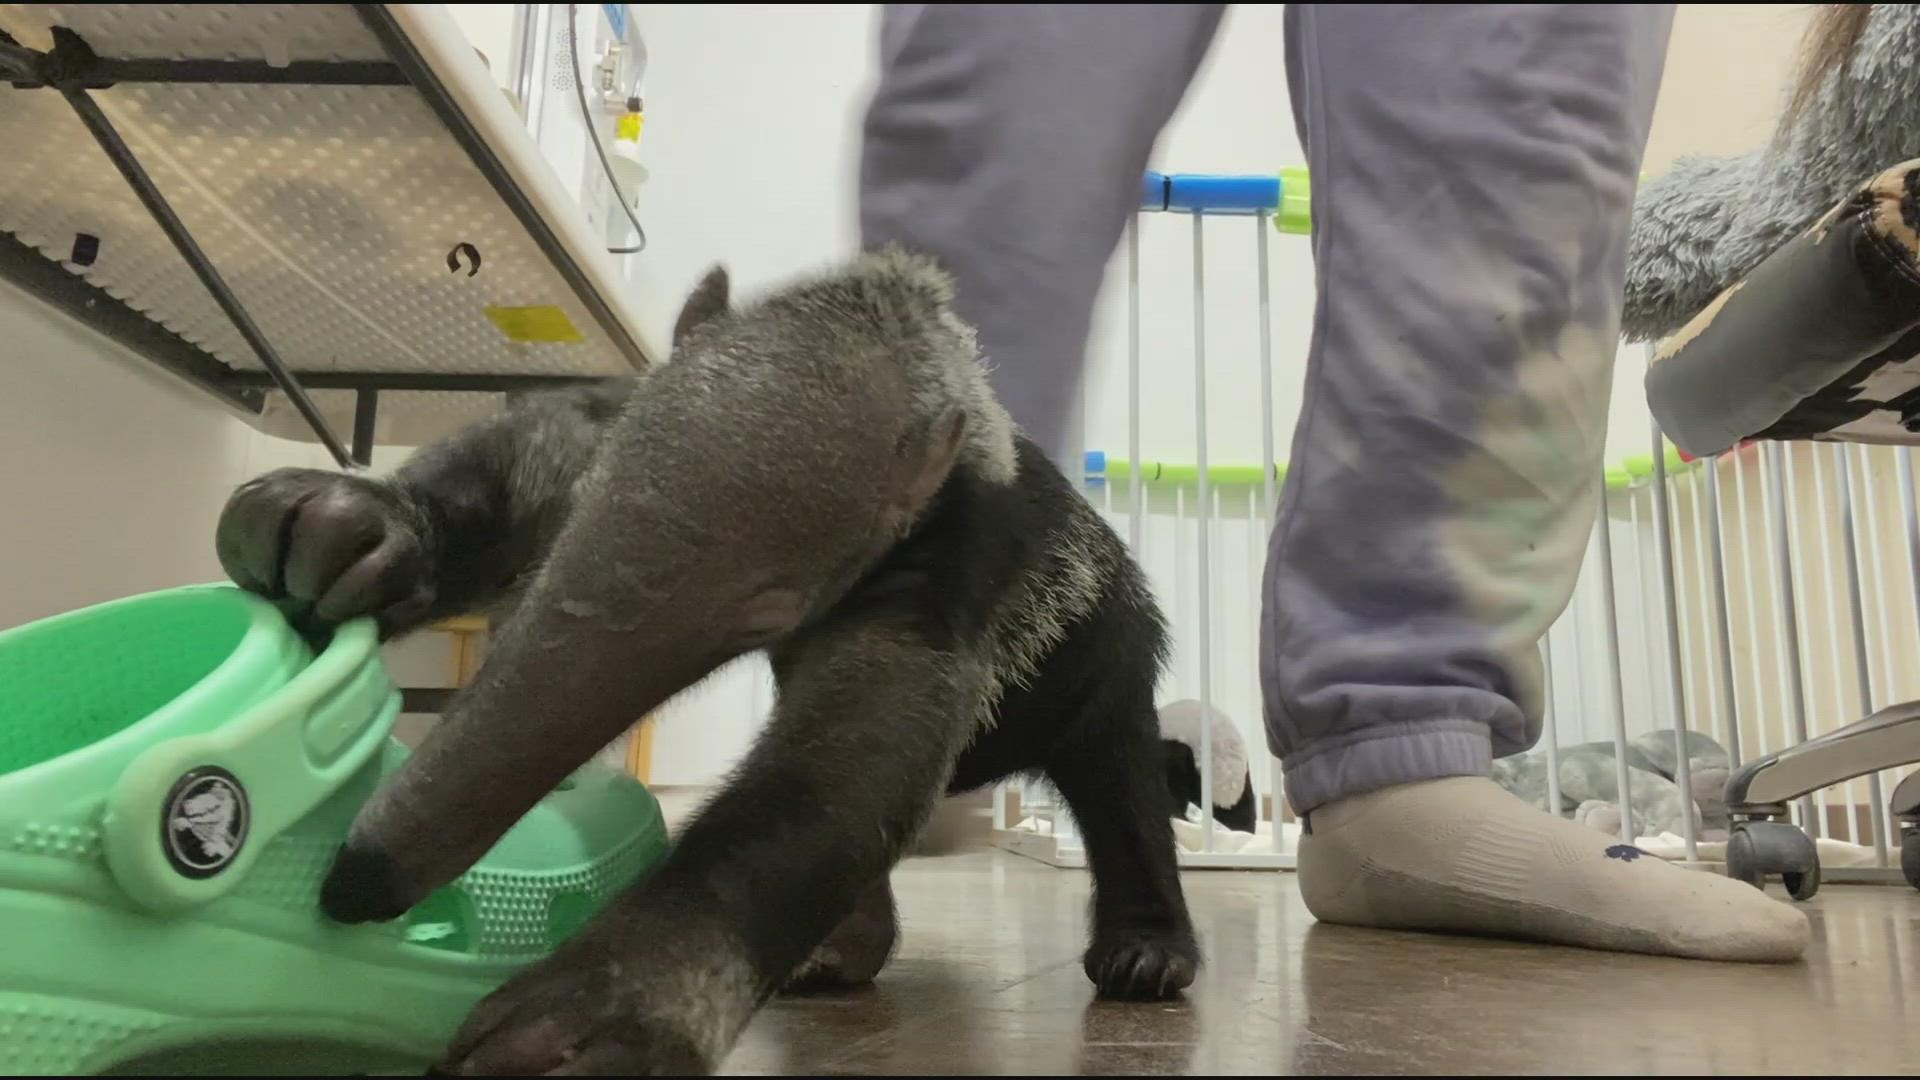 The names of the babies will be released on the Abilene Zoo's social media soon.